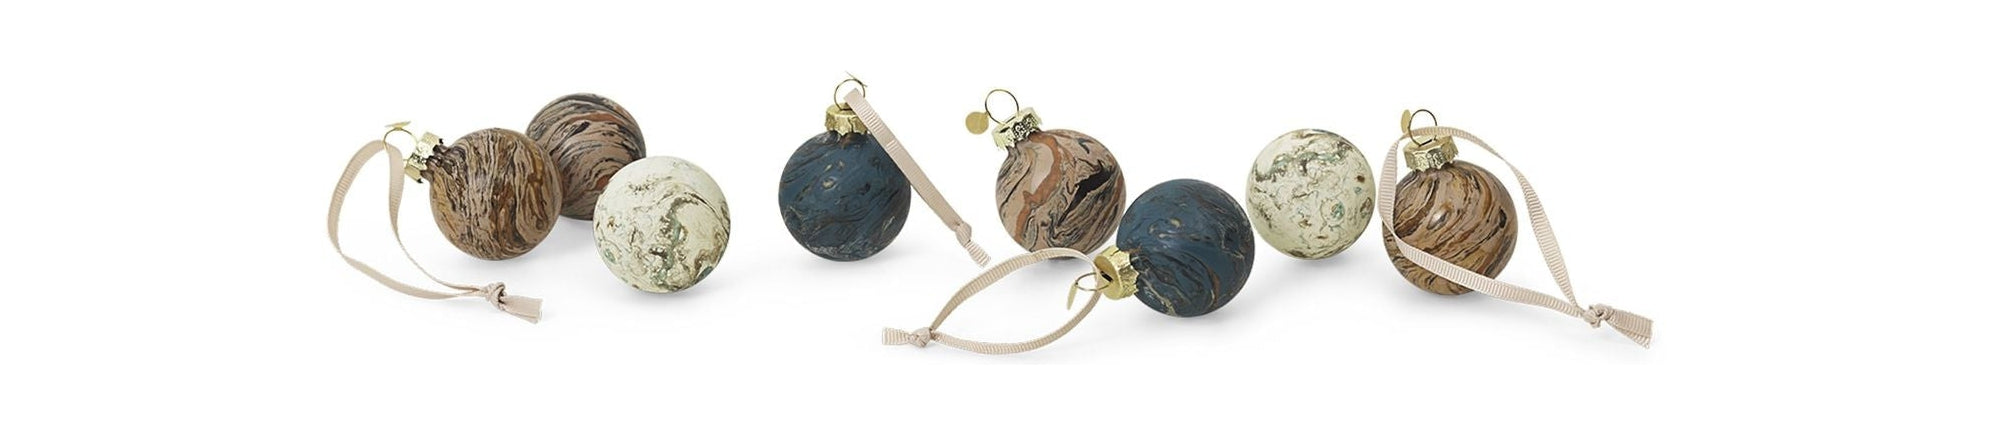 Ferm Living Christmas Marble Baubles Small, sett af 8